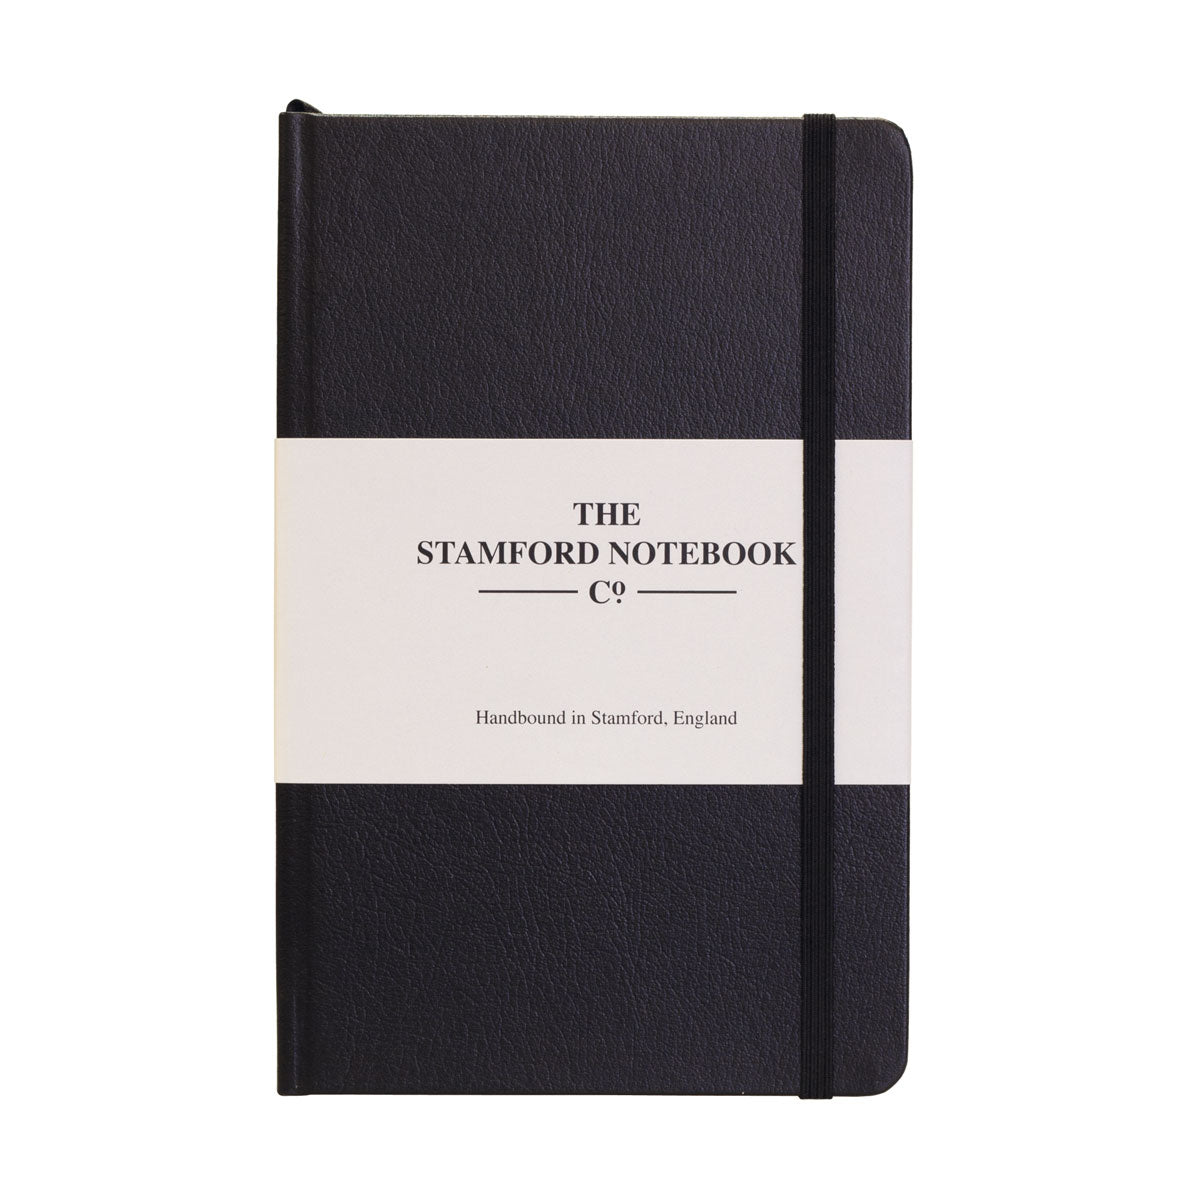 Black recycled leather handbound notebook